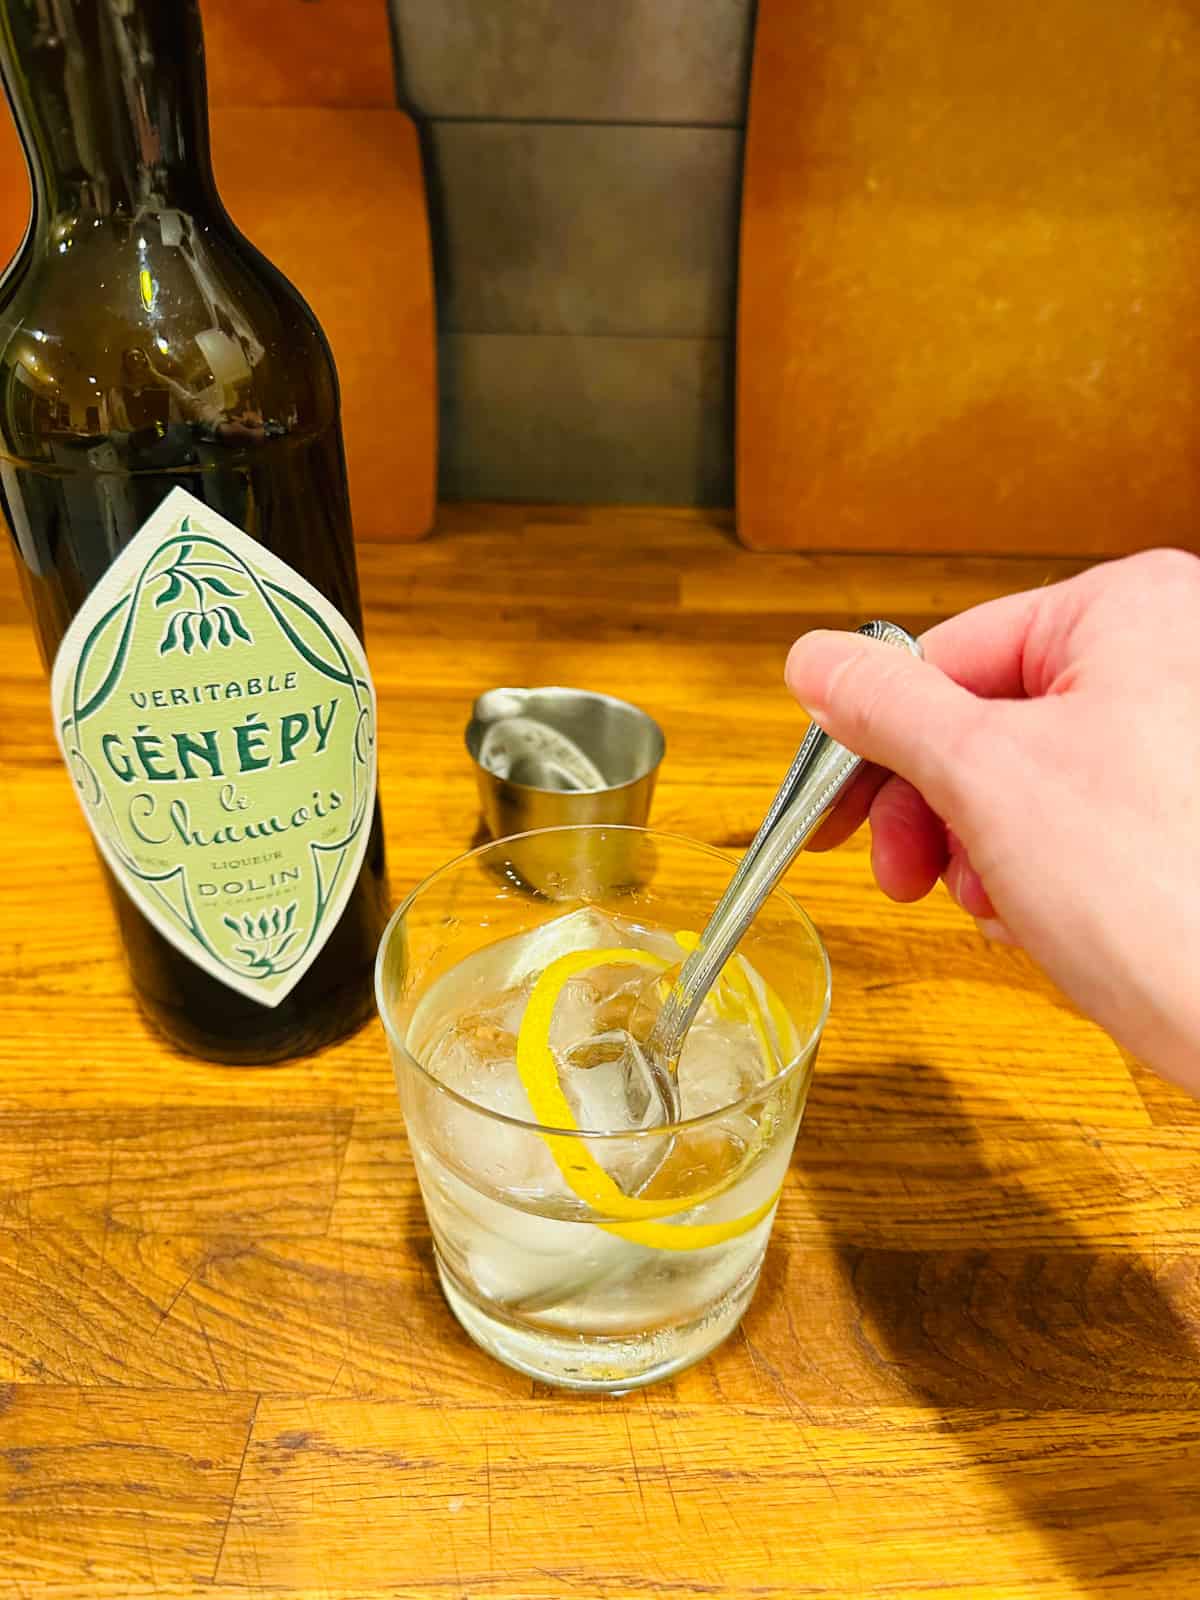 Hand stirring a white Negroni with a metal spoon next to a bottle of genepy.